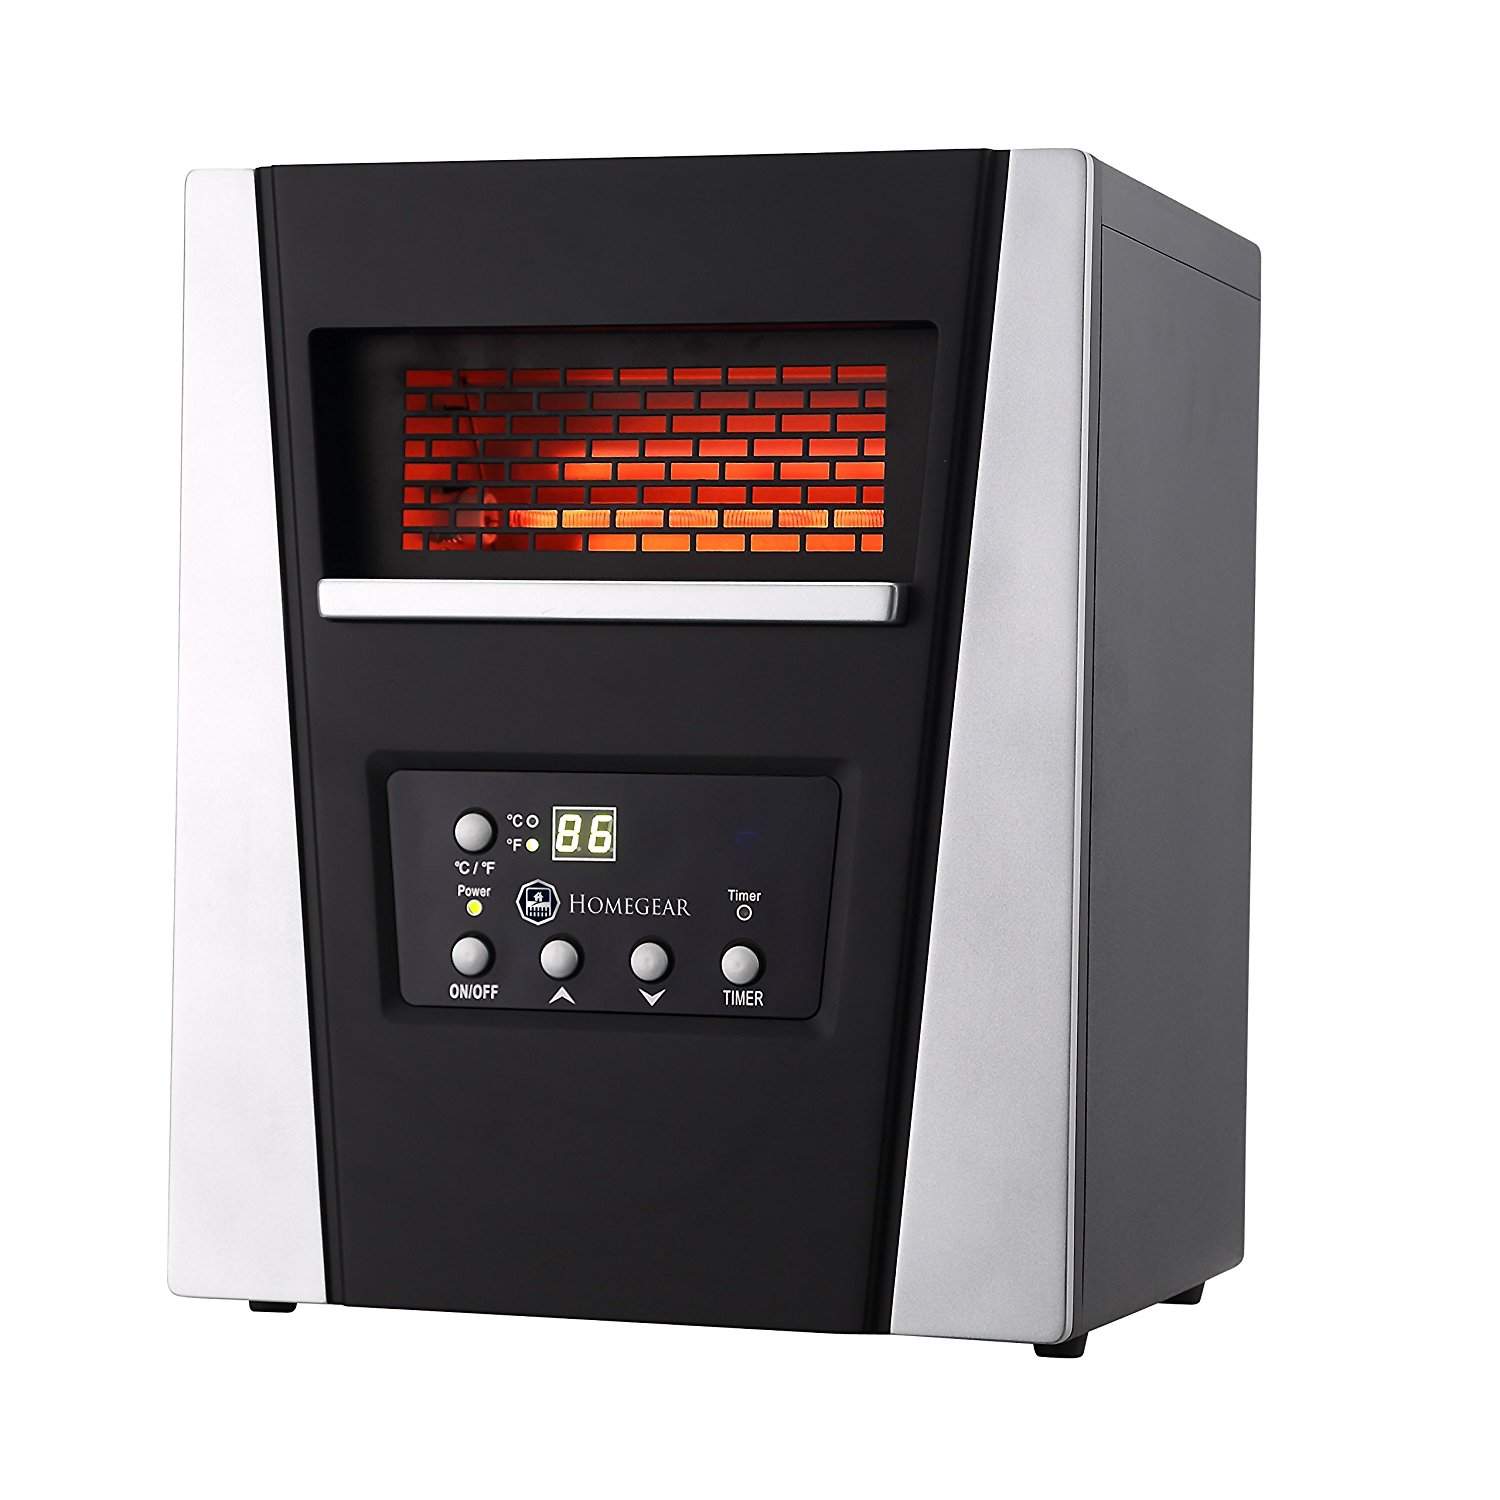 Homegear Pro 1500w Large Room Infrared Space / Cabinet Heater